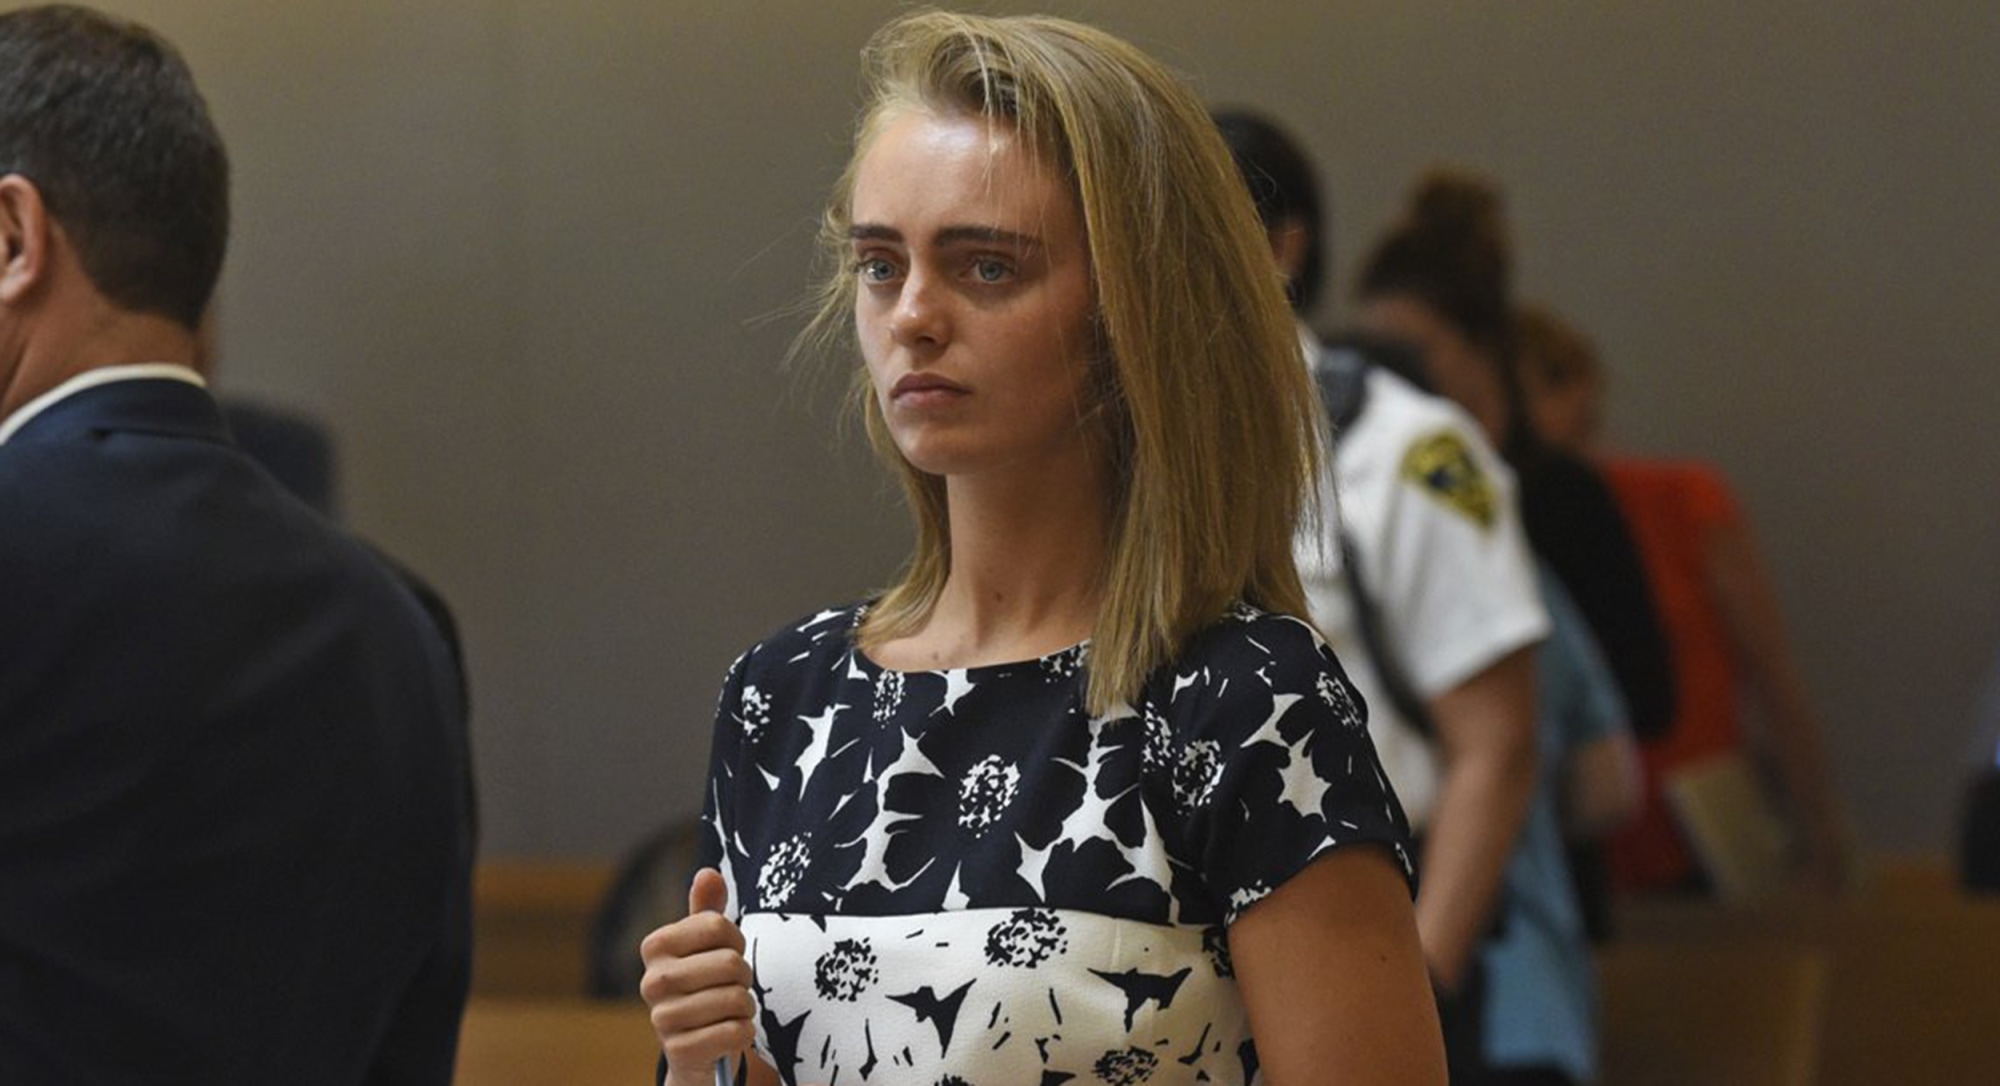 Wrongful Death Lawsuit Against Michelle Carter Who Encouraged Boyfriend's Suicide Is Dismissed (FULL ARTICLE) 190410-michelle-carter-al-0956_9f6f9287f98bbb18eafb7173e1d36696.fit-2000w